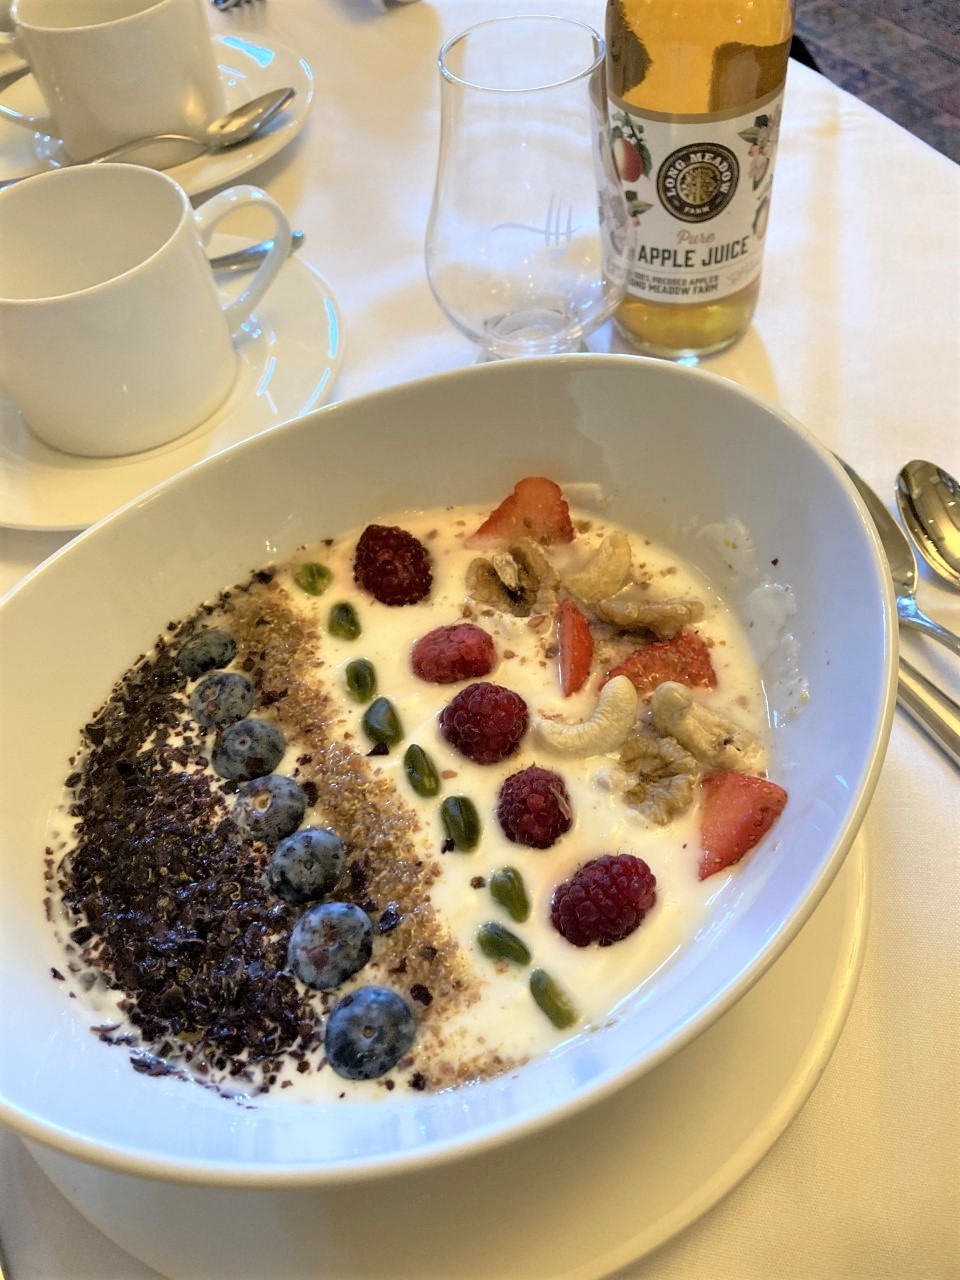 The light breakfast created by culinary director Noel McMeel.